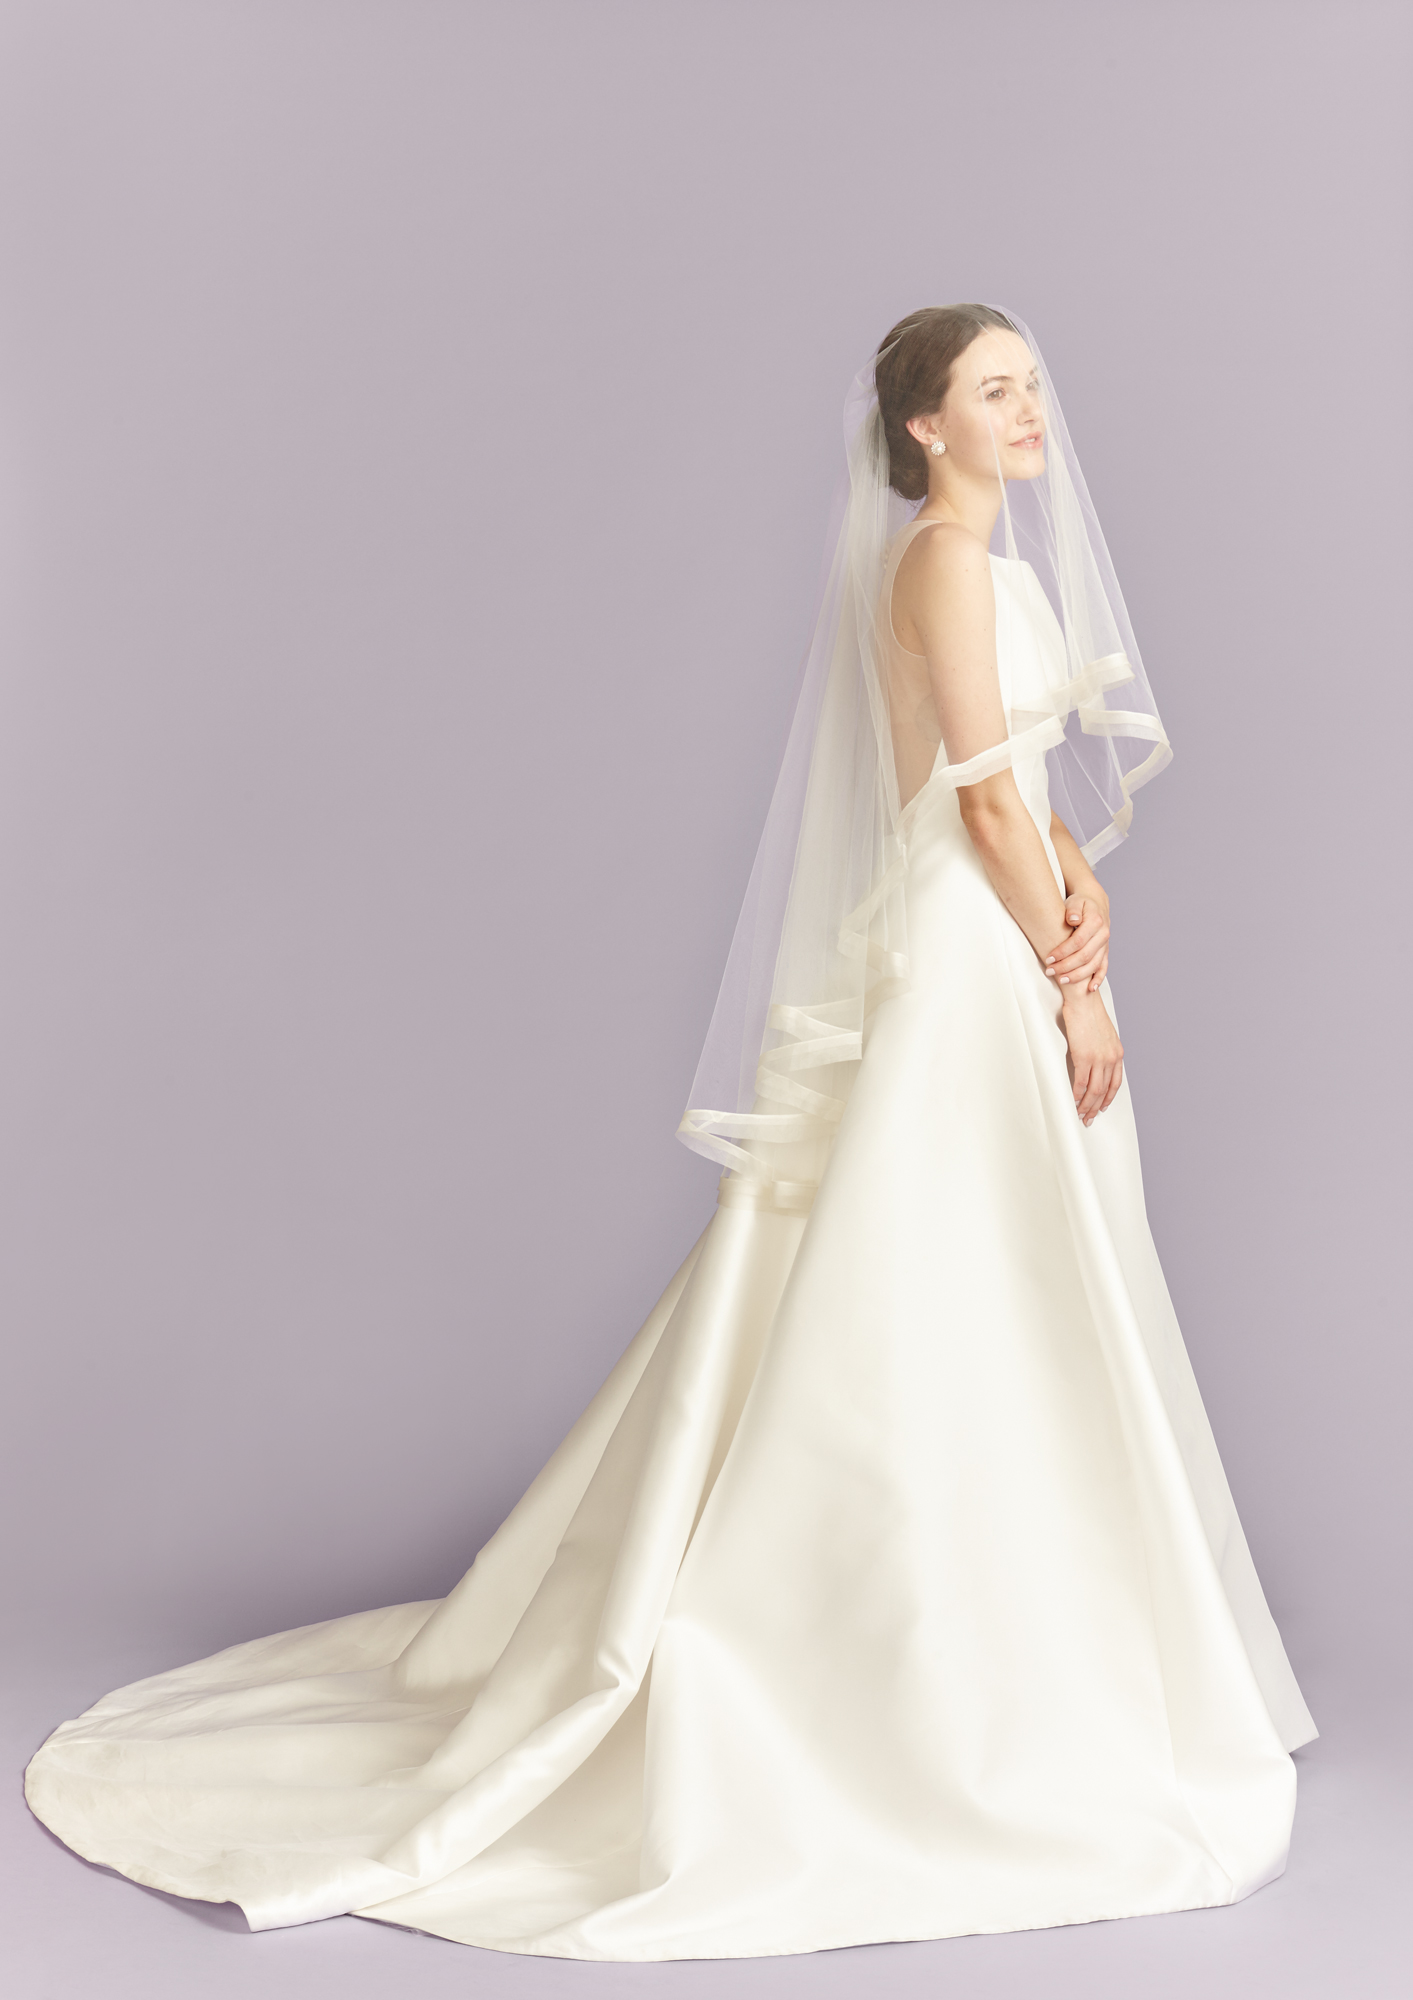 Longest Wedding Veil In History See More On This Design You Love